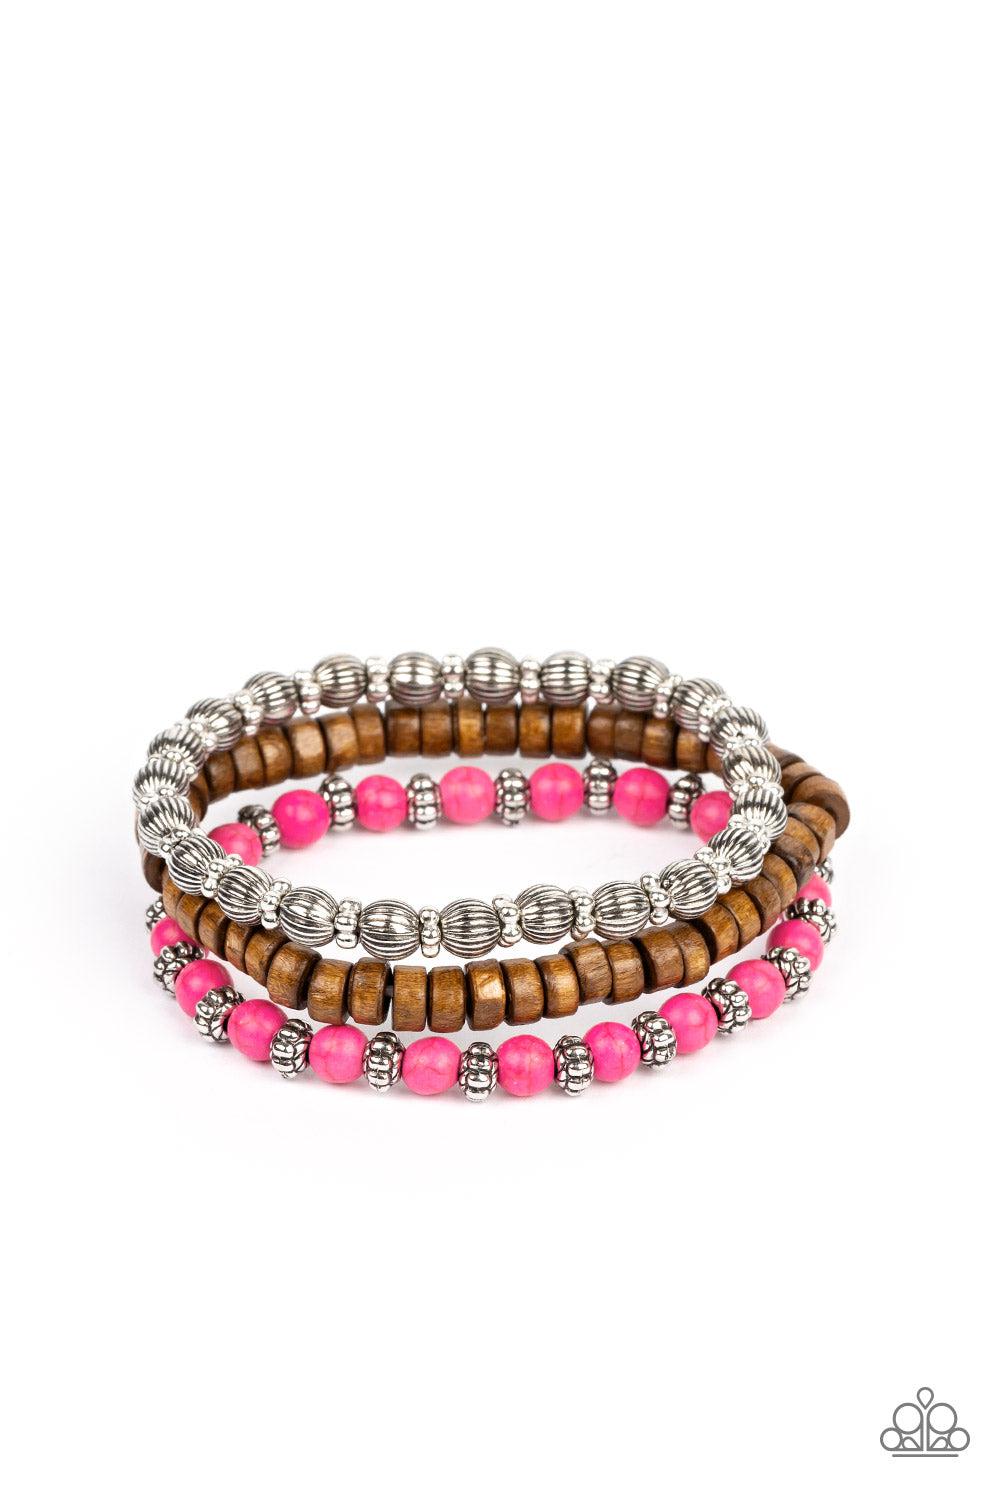 ESCAPADE Route Pink Stone & Wood Bracelet Set - Paparazzi Accessories- lightbox - CarasShop.com - $5 Jewelry by Cara Jewels